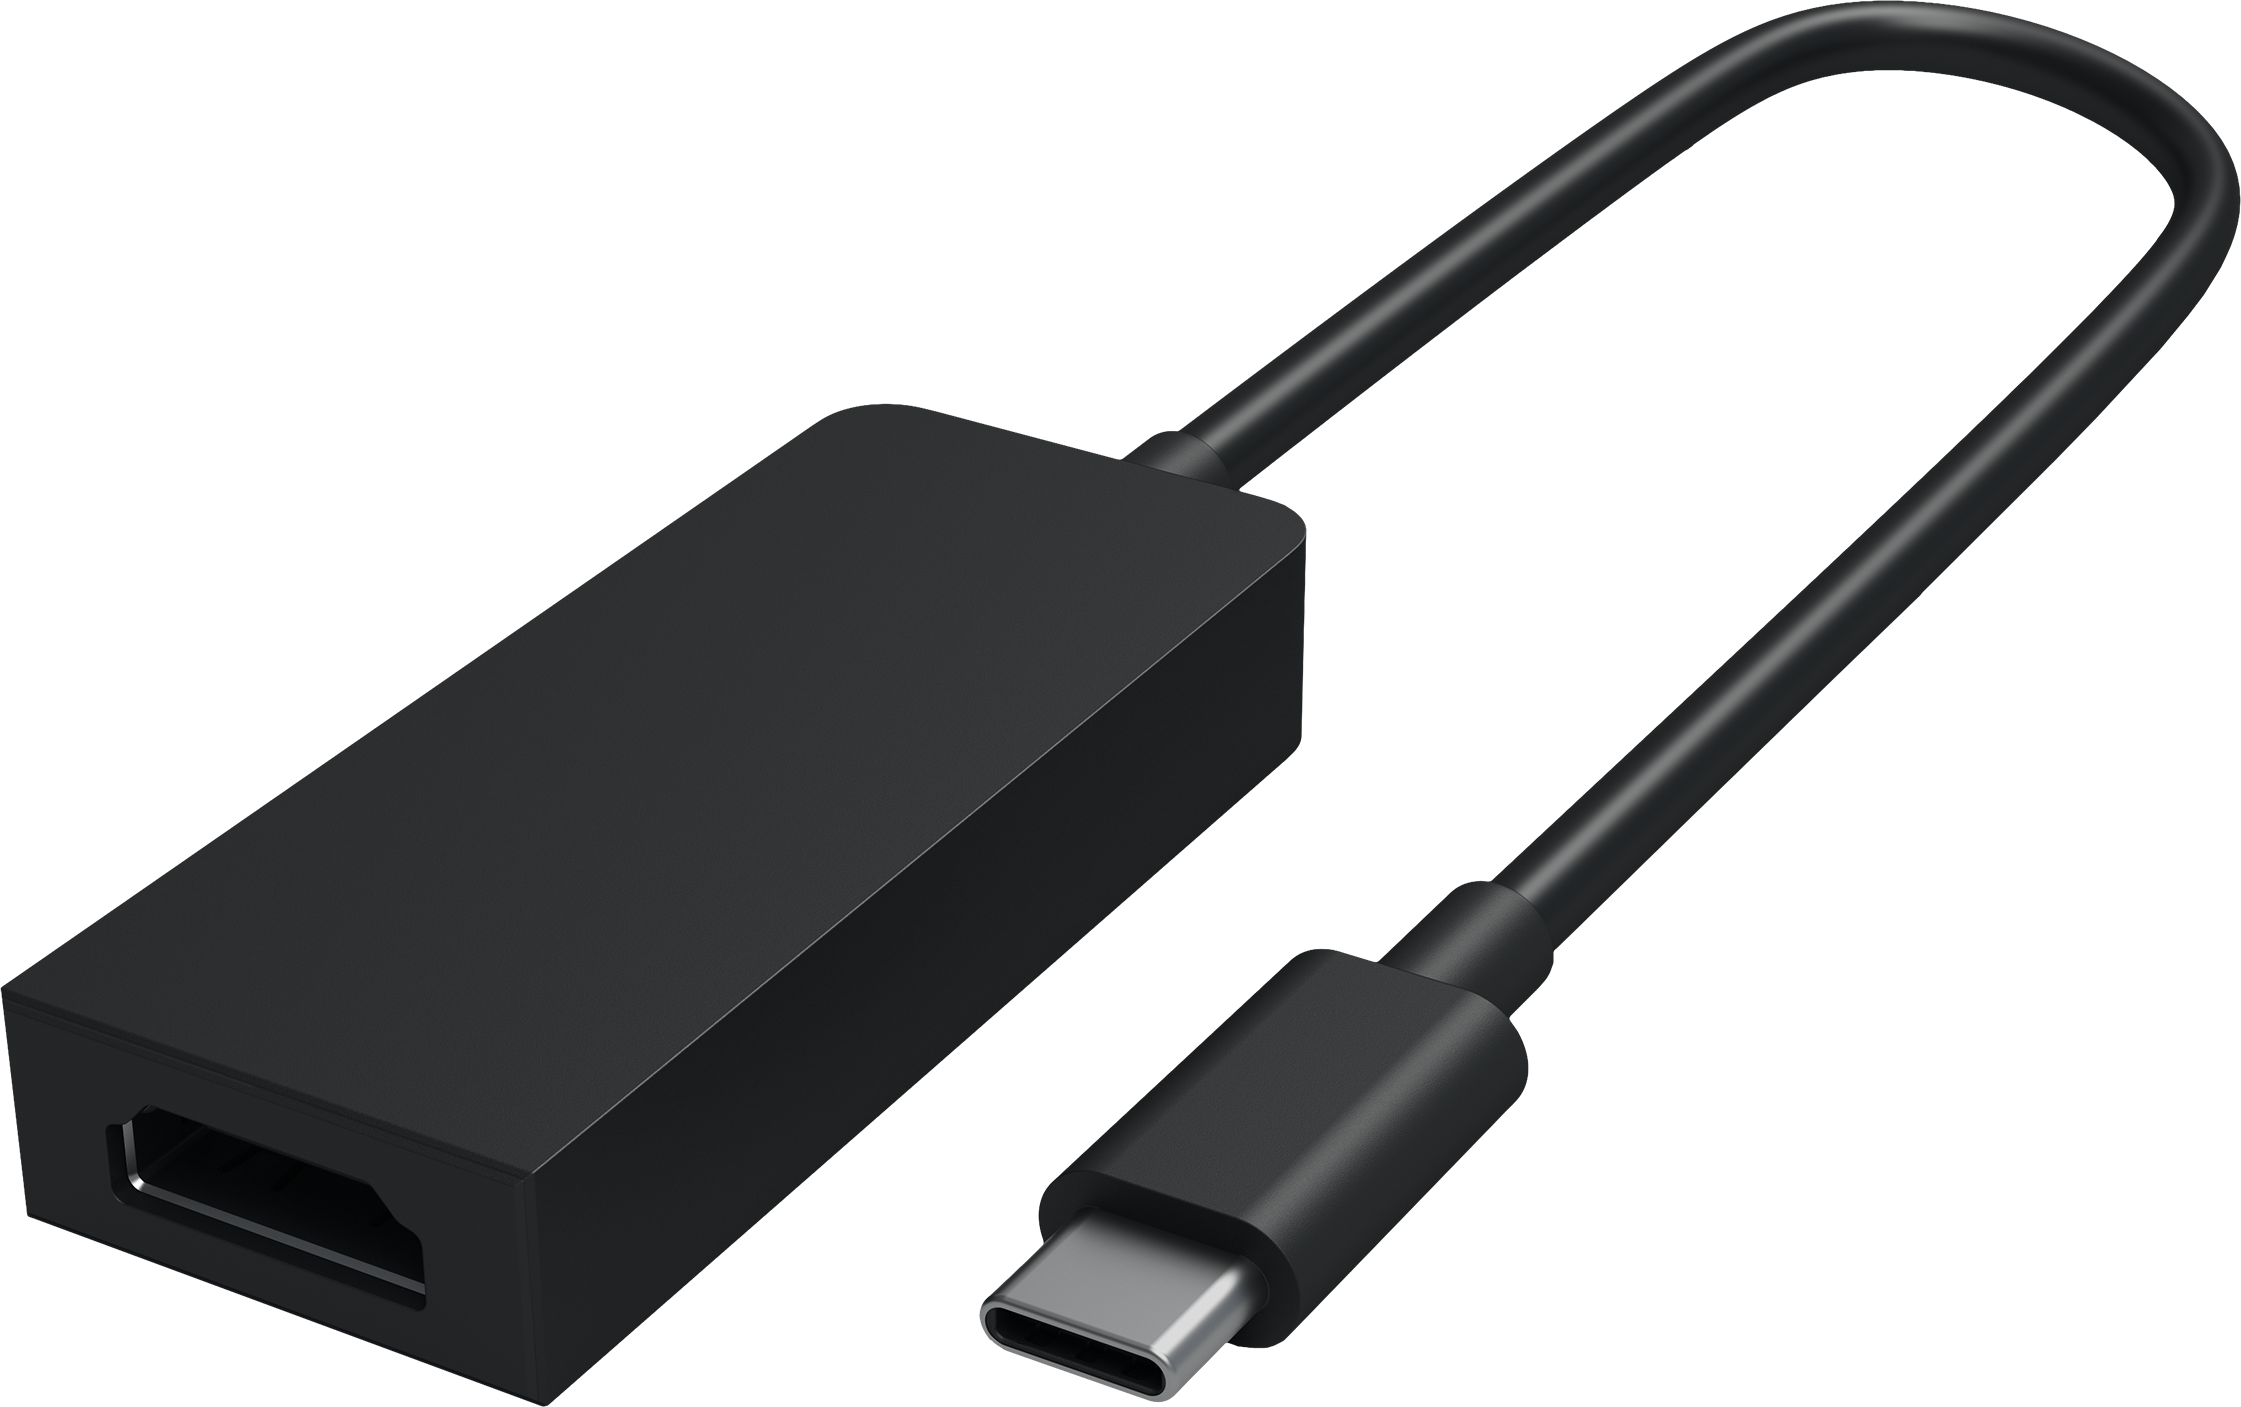 Surface USB-C to HDMI | USB Type C to HDMI - Microsoft Store